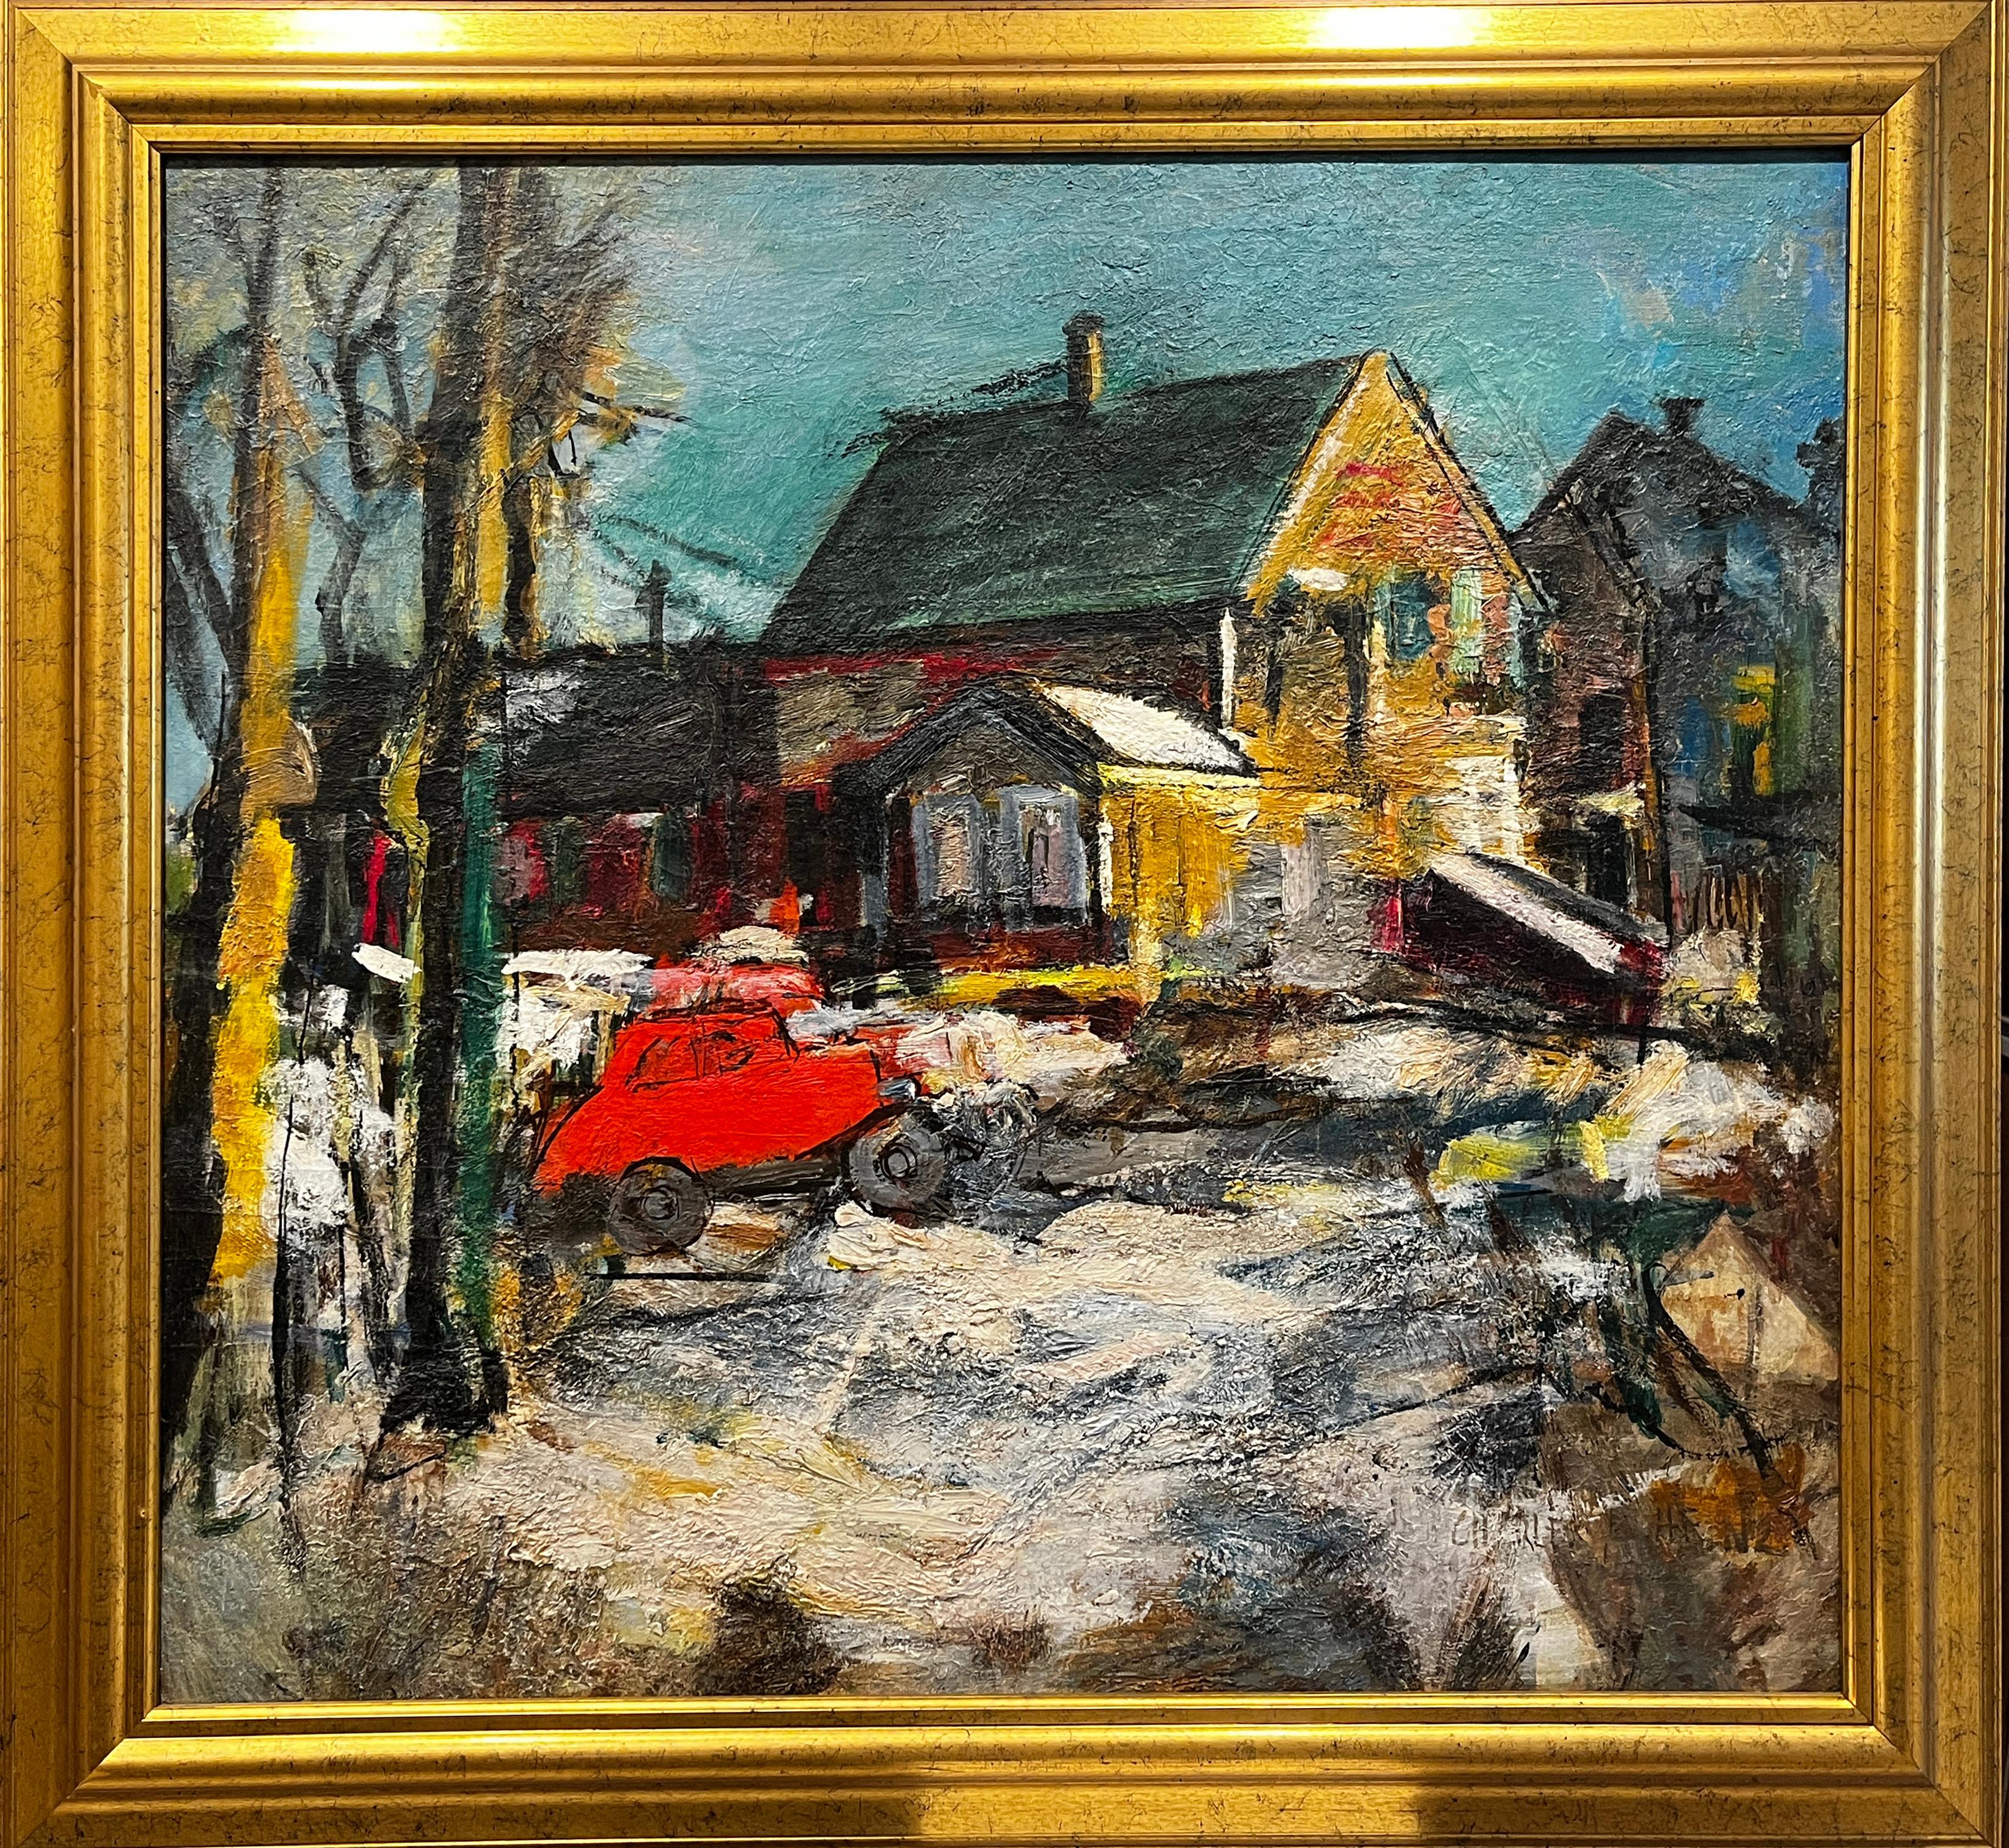 Red Car - Painting by Charles Heinz